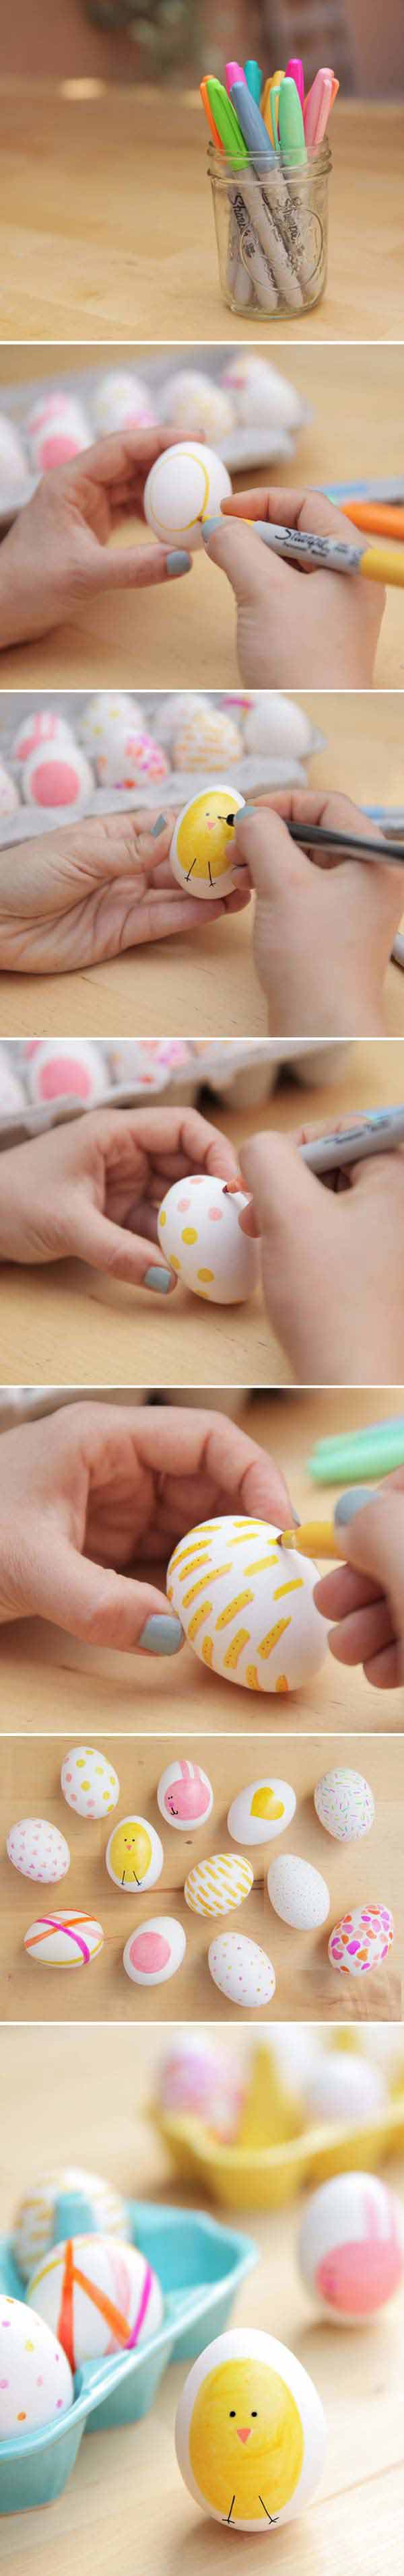 Use sharpies to decorate a few Easter eggs differently